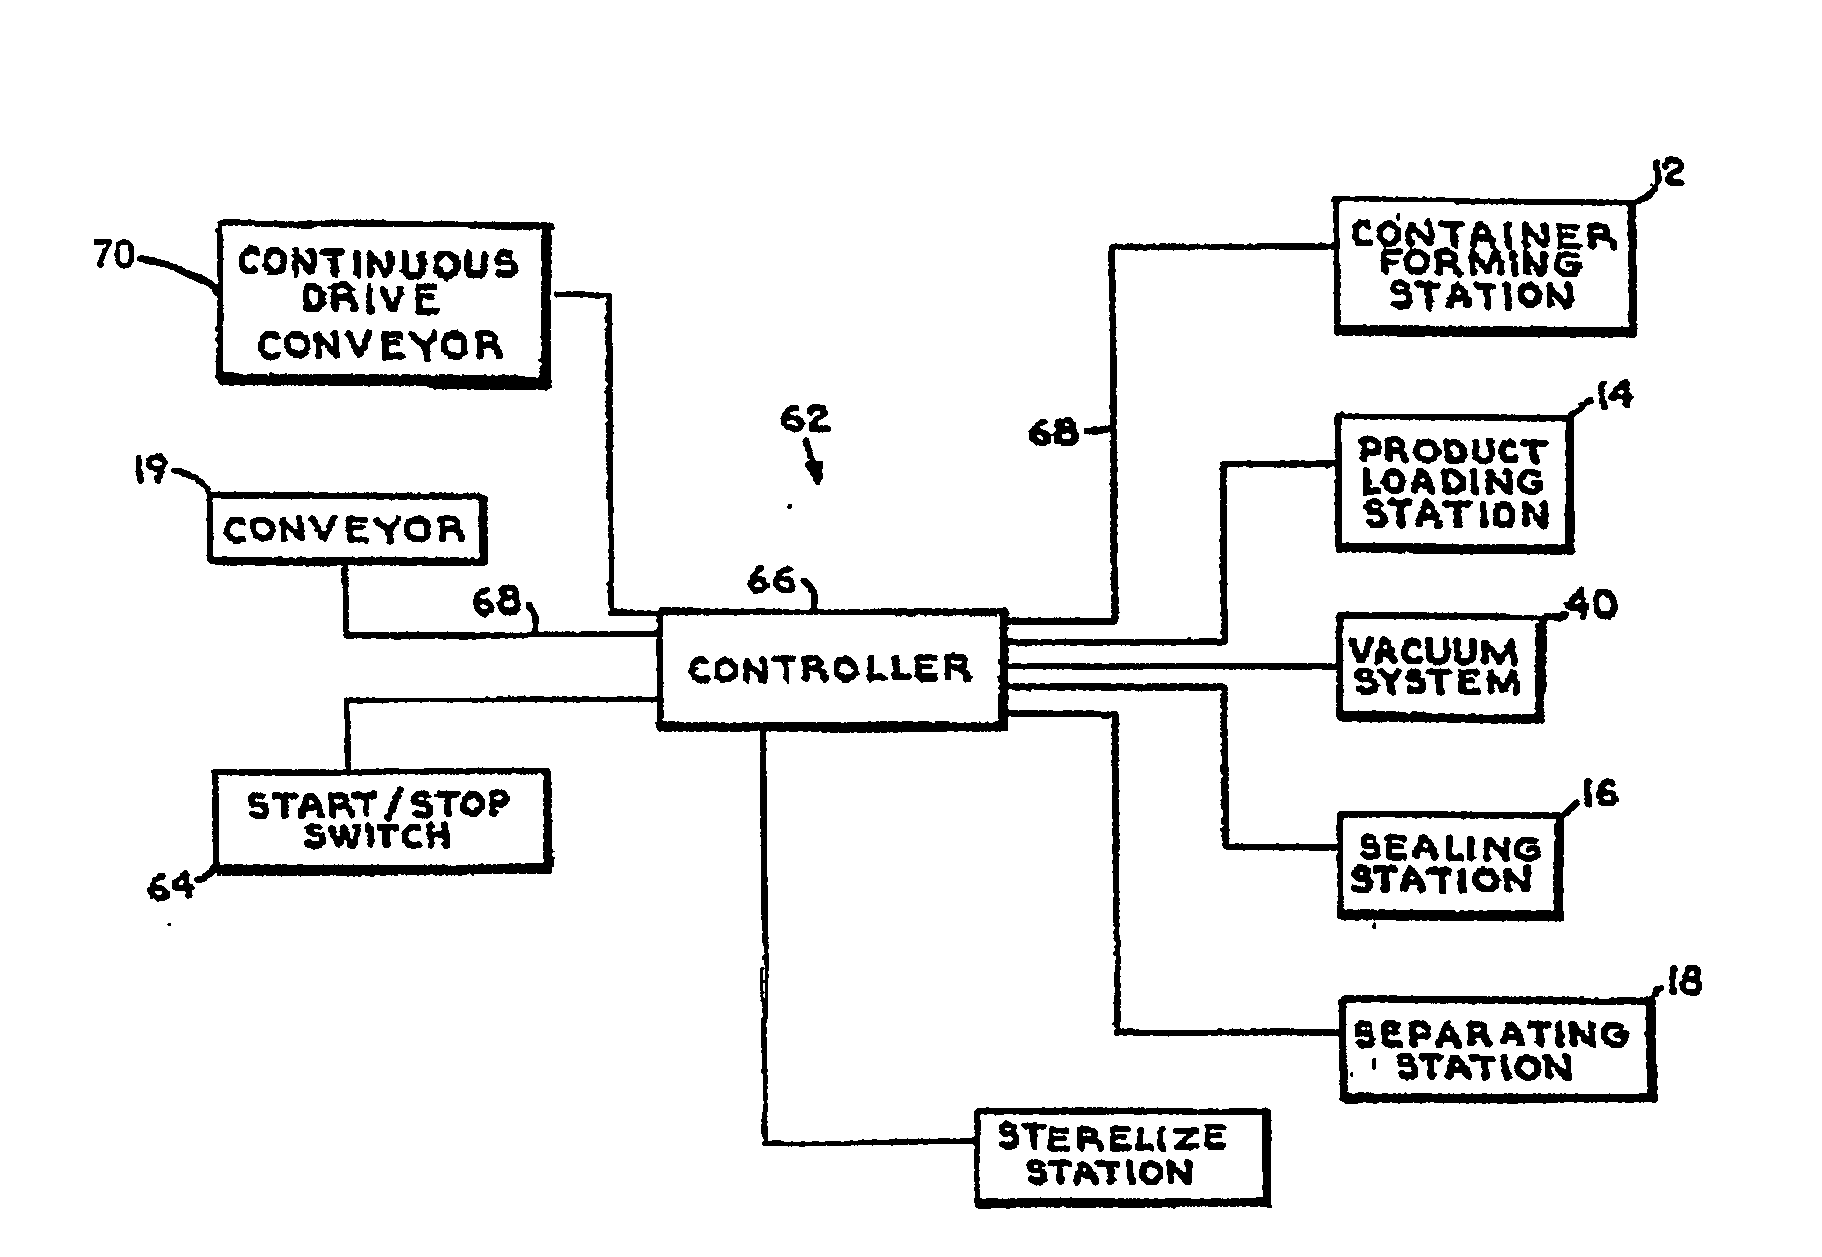 Inline processing and irradiation system